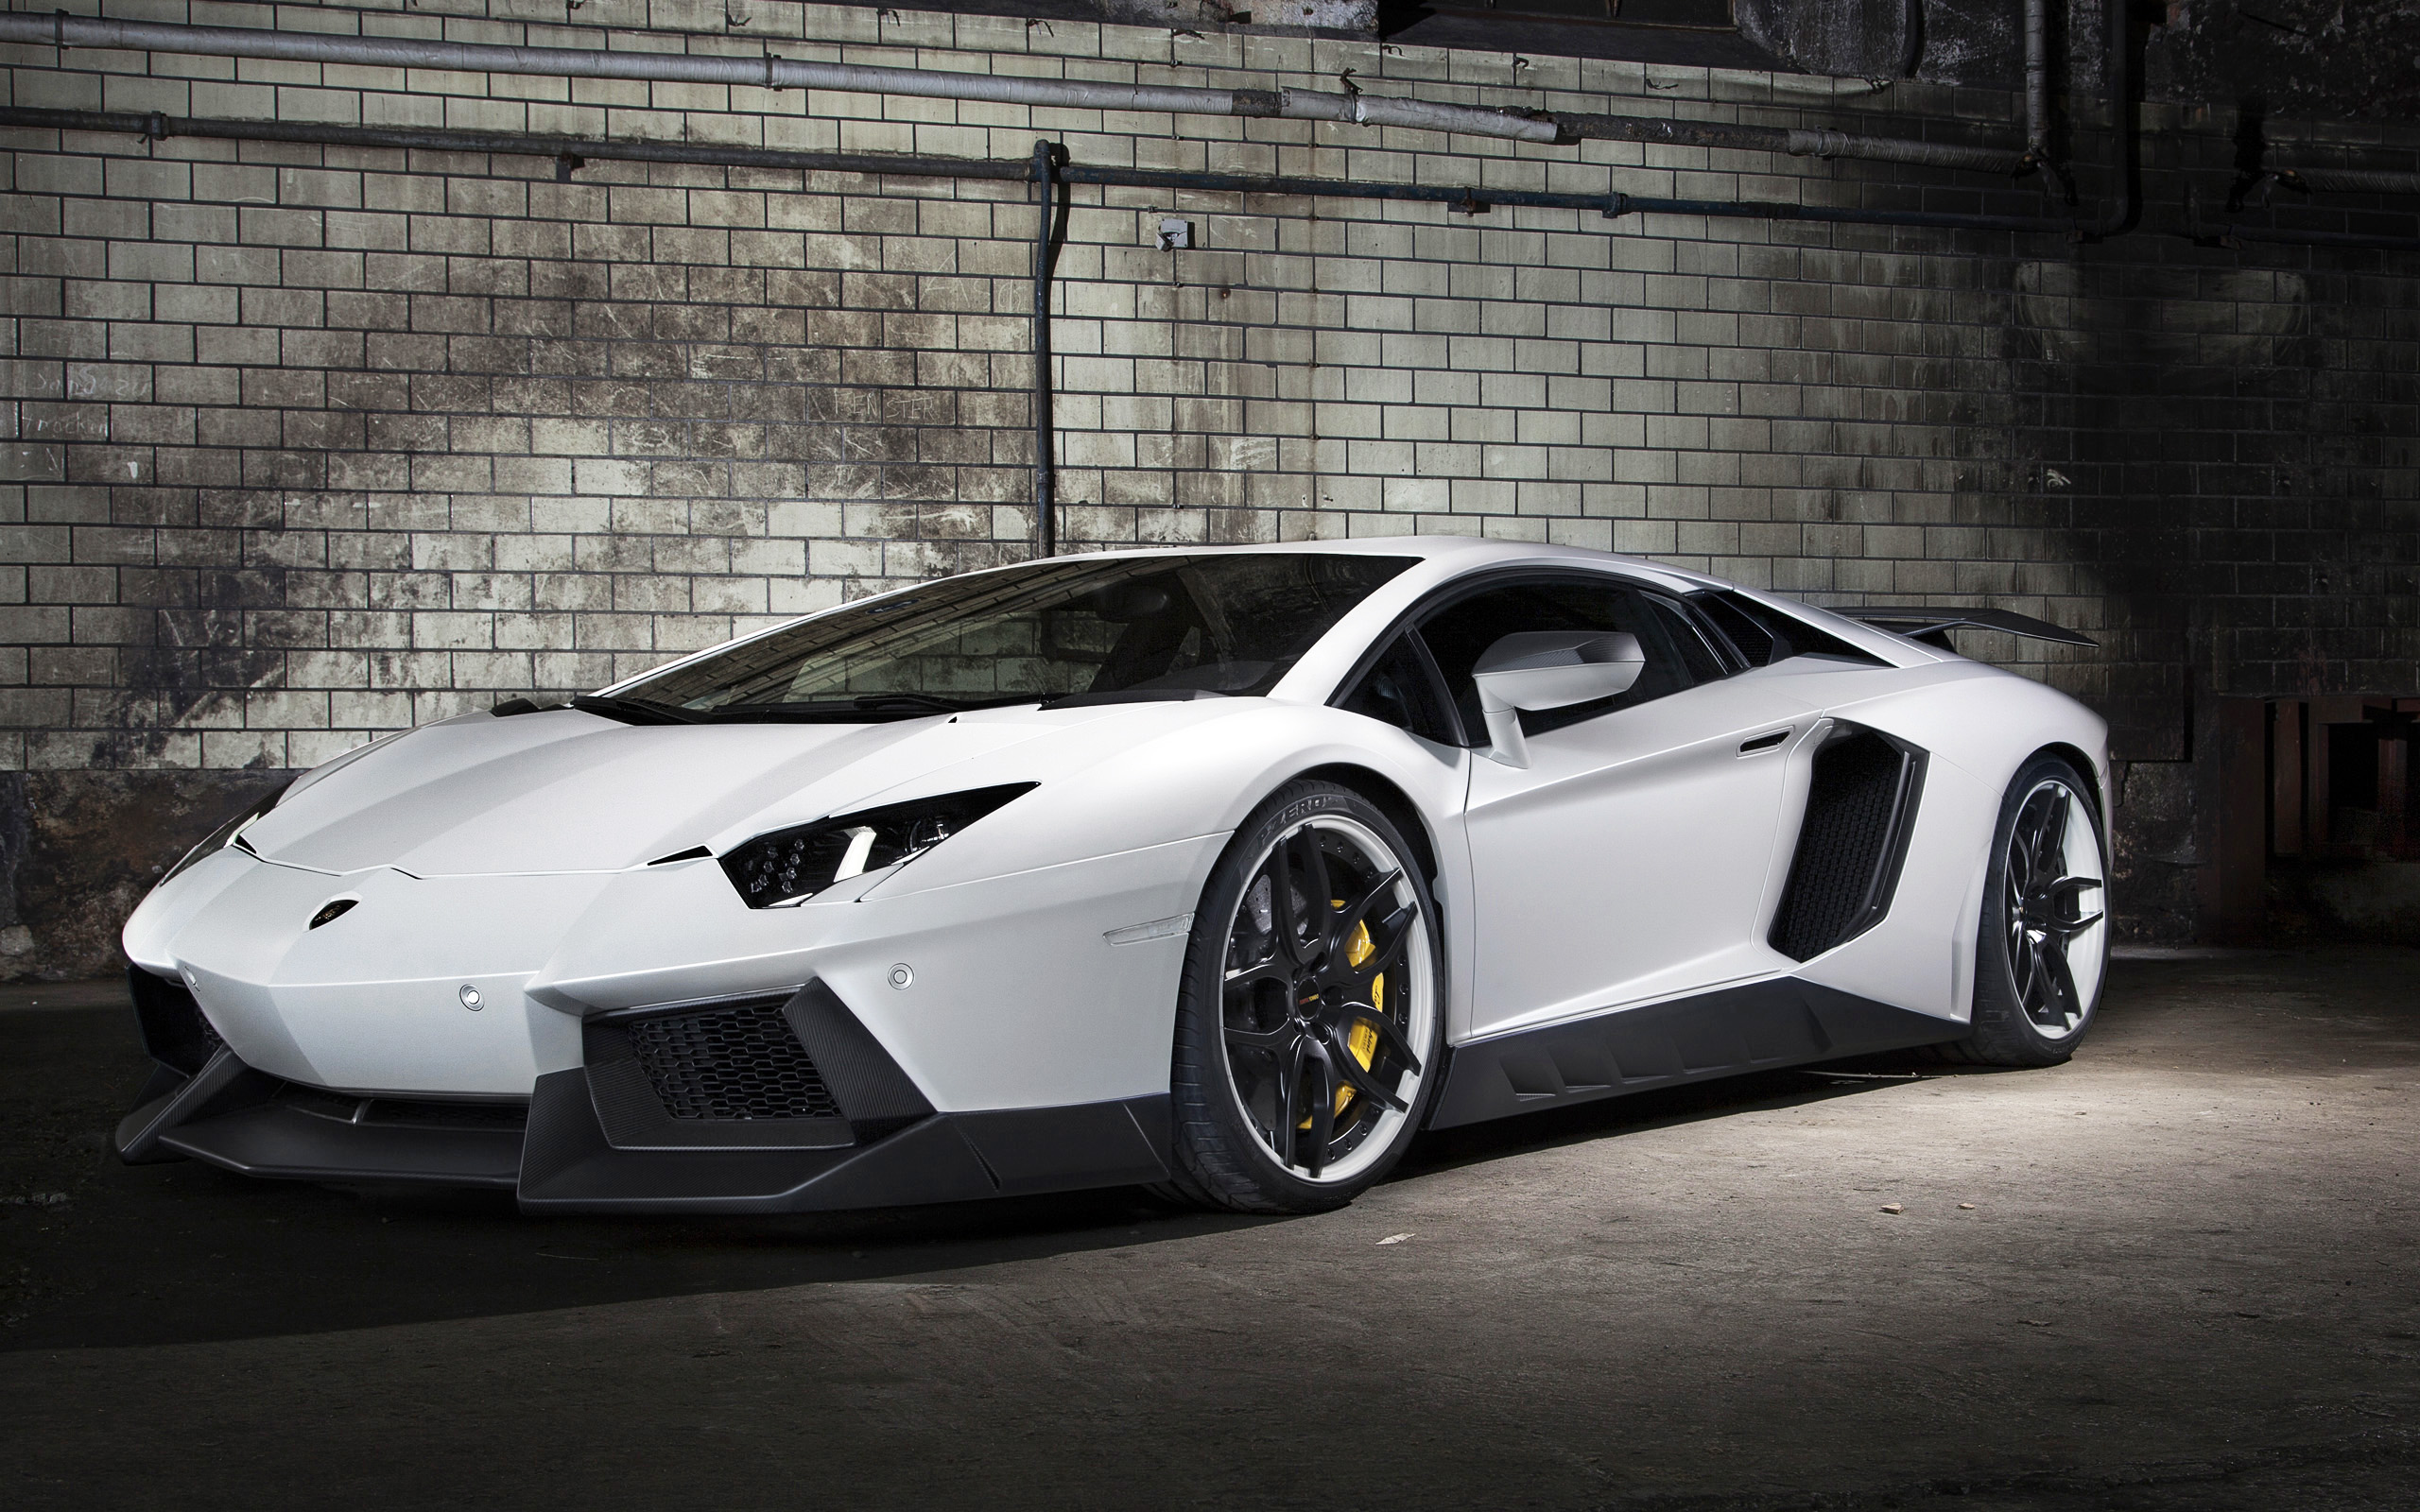 Lamborghini Aventador Wallpapers HD A3 White - lamborghini aventador desktop sports cars, race cars, luxury cars, expensive cars, wallpapers pictures images free download